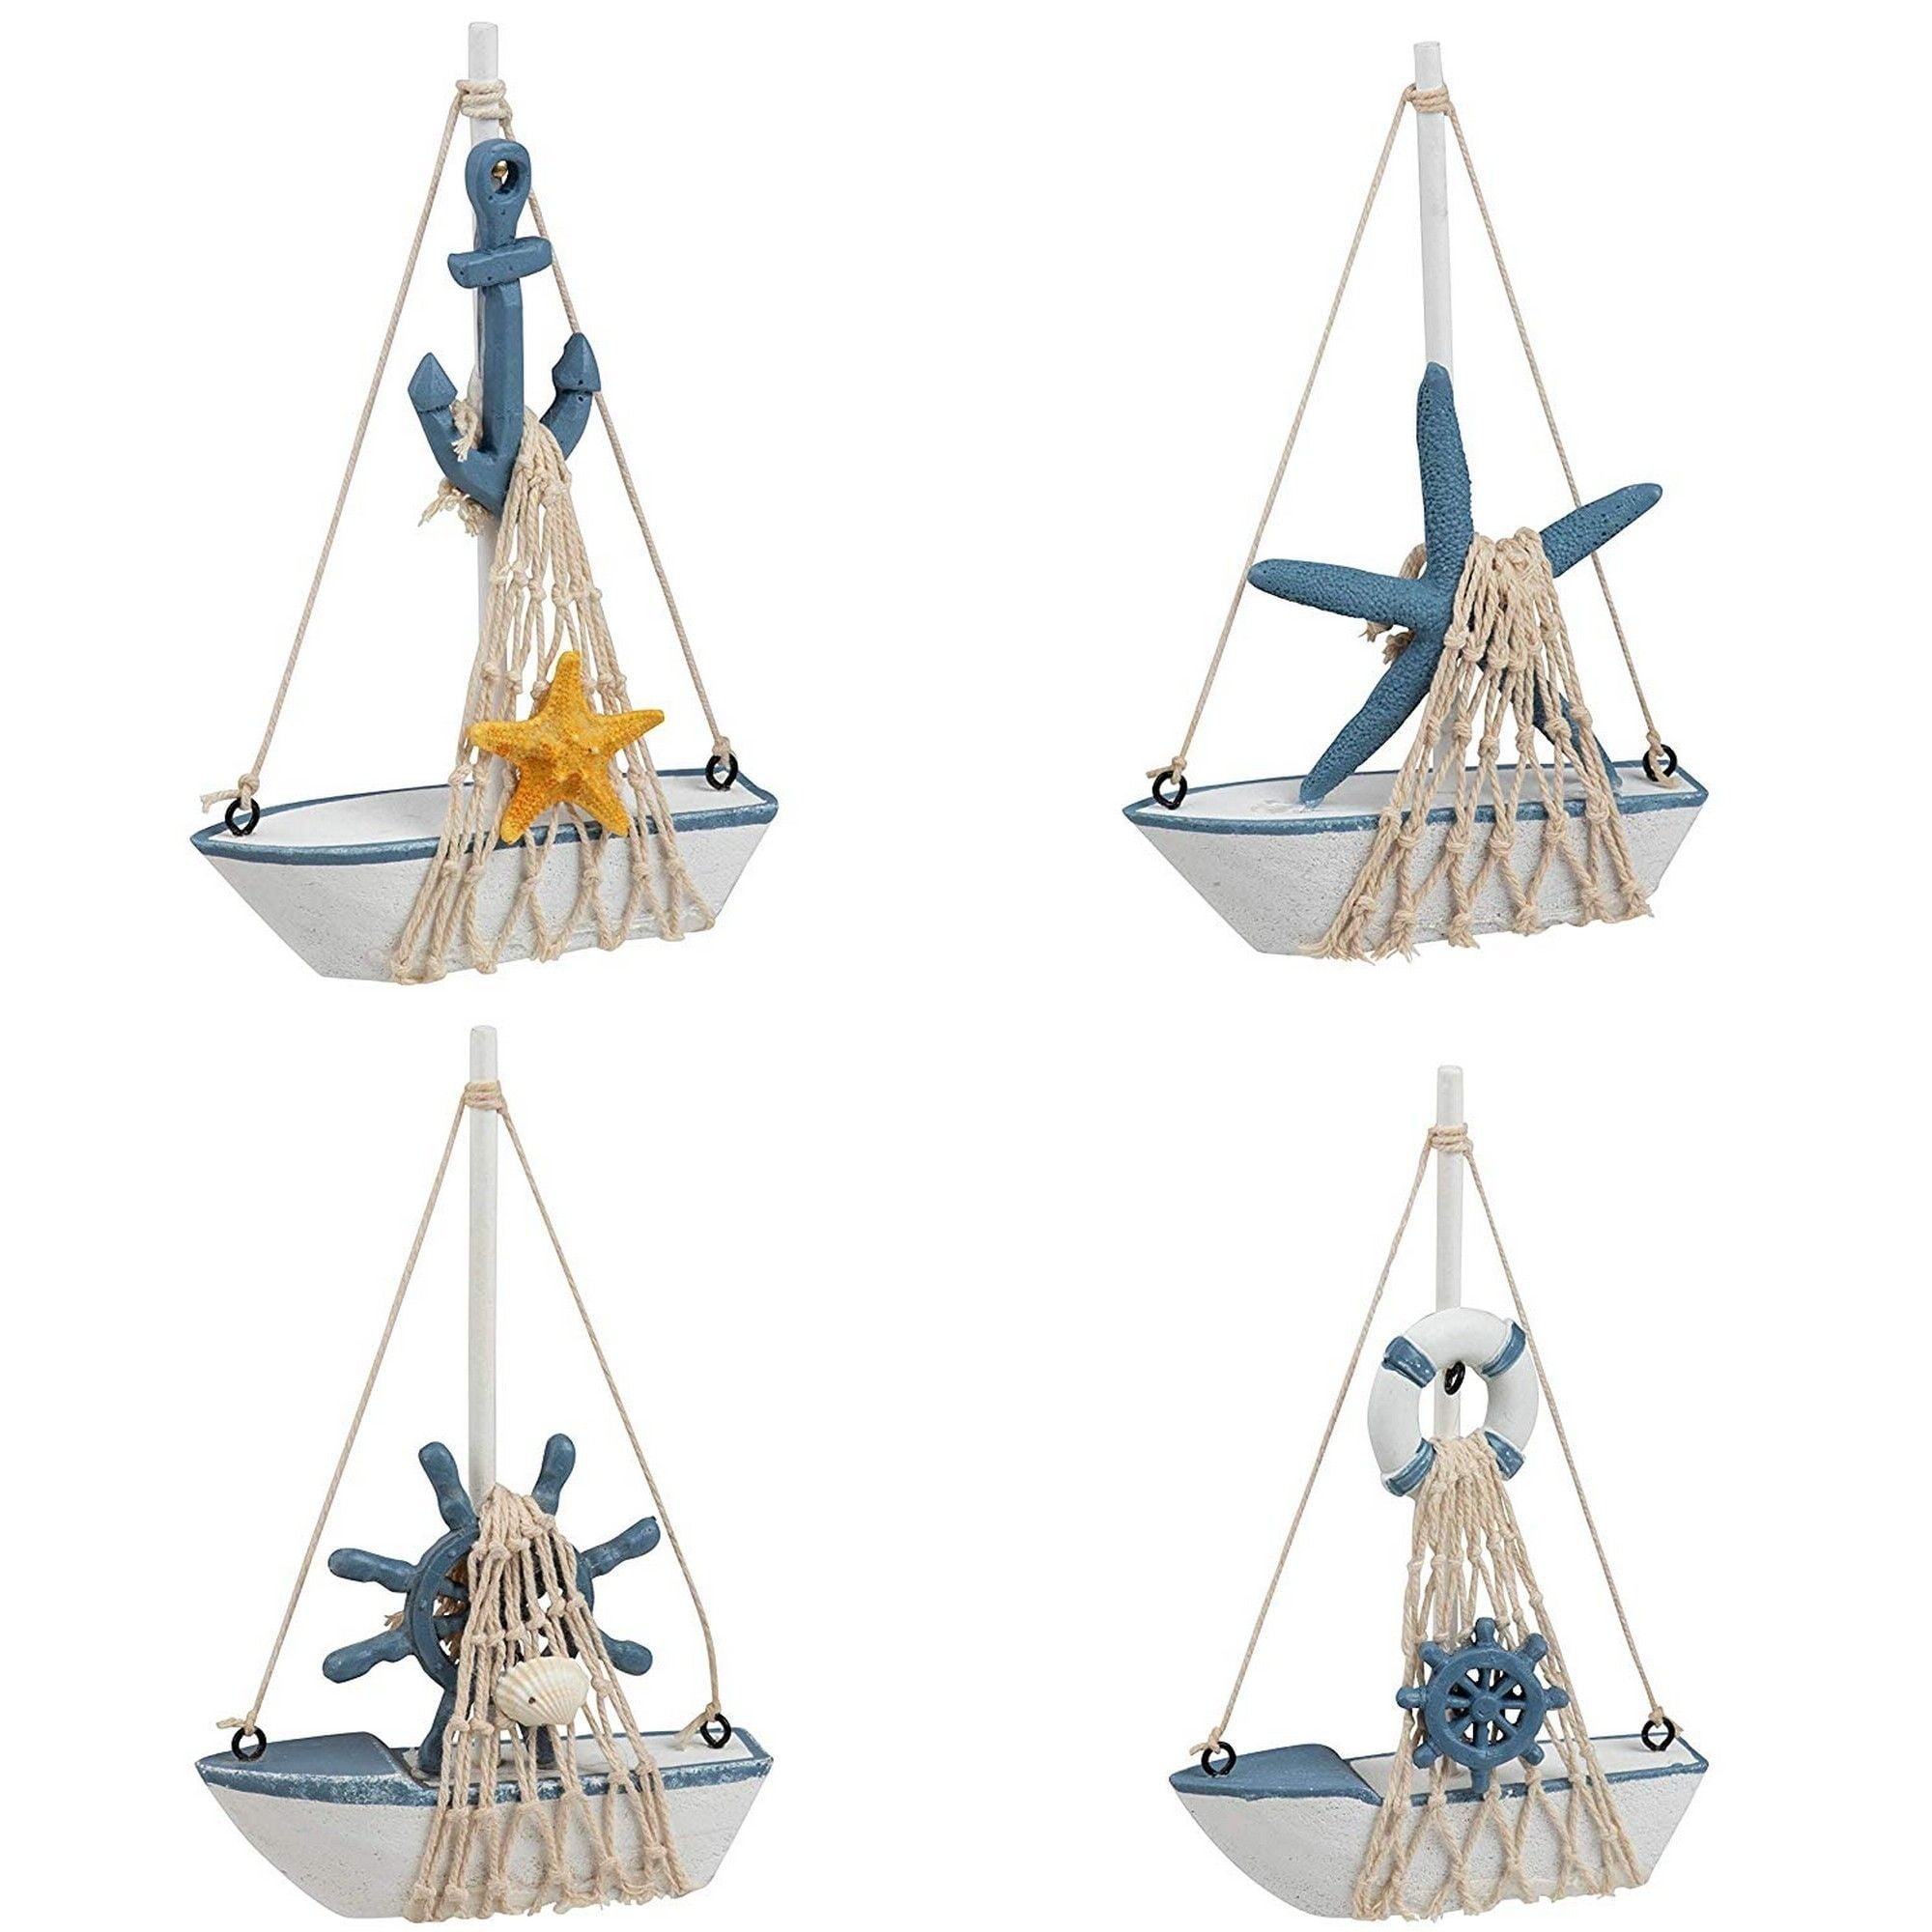 2 Pcs Small Wooden Boat Toy Unfinished Model Ornament Playset Fishing  Decorations for Home Child 